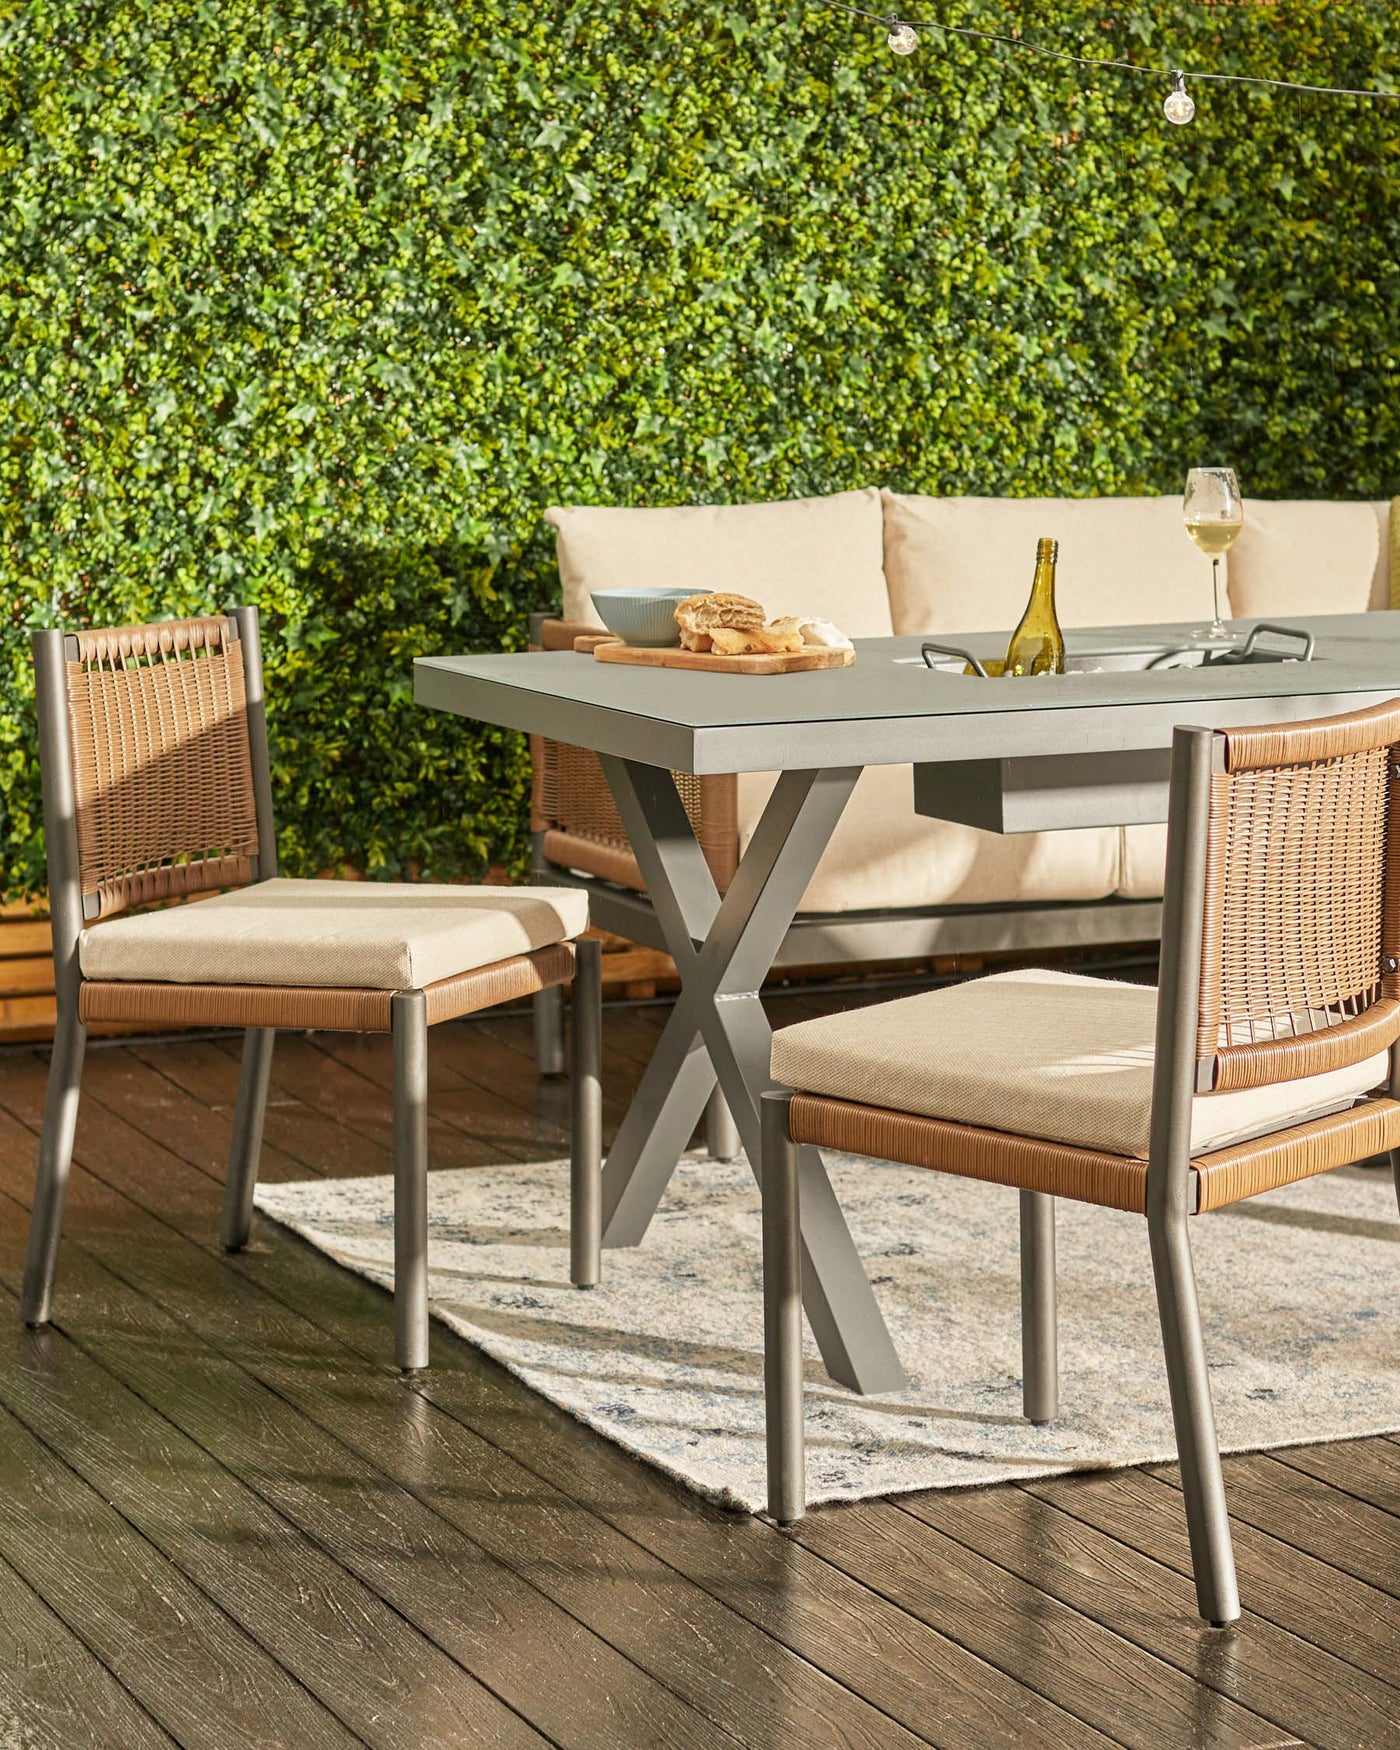 Outdoor dining set comprising a modern rectangular table with a grey top and crisscross metal legs, and four contemporary dining chairs with metal frames, wicker backing, and cream cushions, arranged on a patterned area rug. A bench with a matching cushion is also visible in the background, against a wall covered in lush greenery. The table is set with a bowl, bread, a bottle, and a glass of wine.